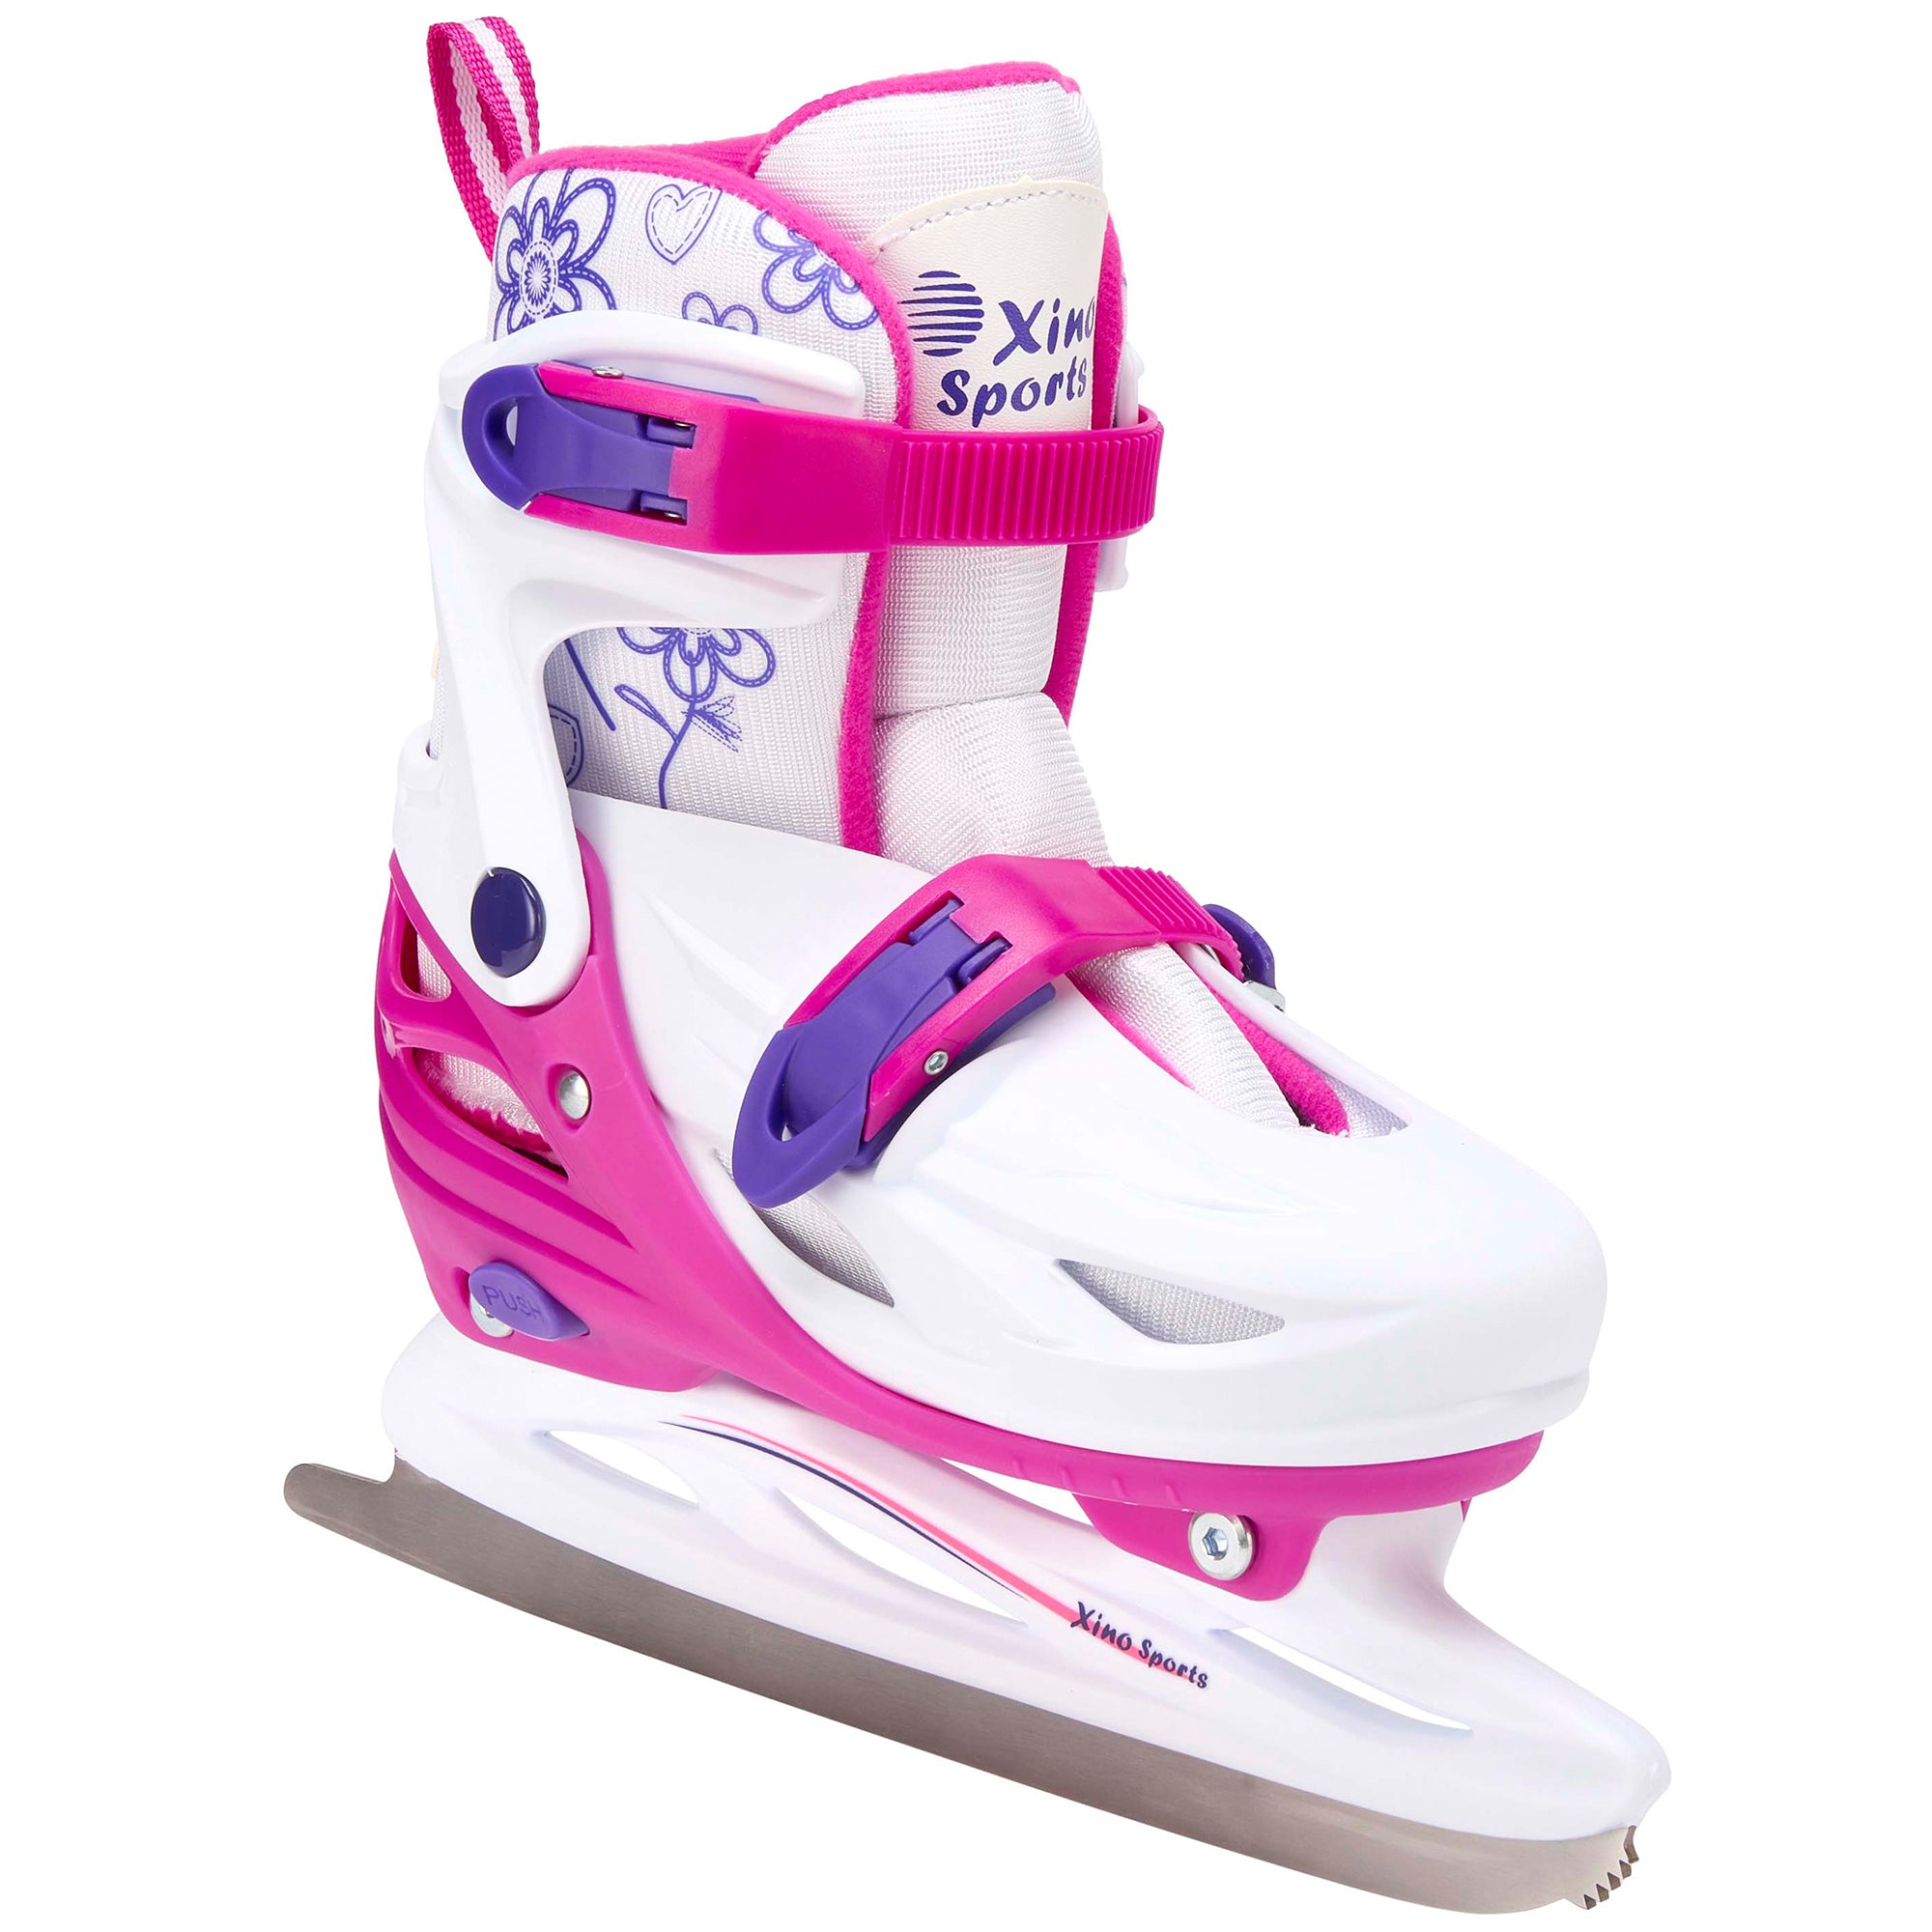 Girls Ice Skates | Adjustable | Reinforced Ankle Support and Padding | Xino Sports - Xino Sports